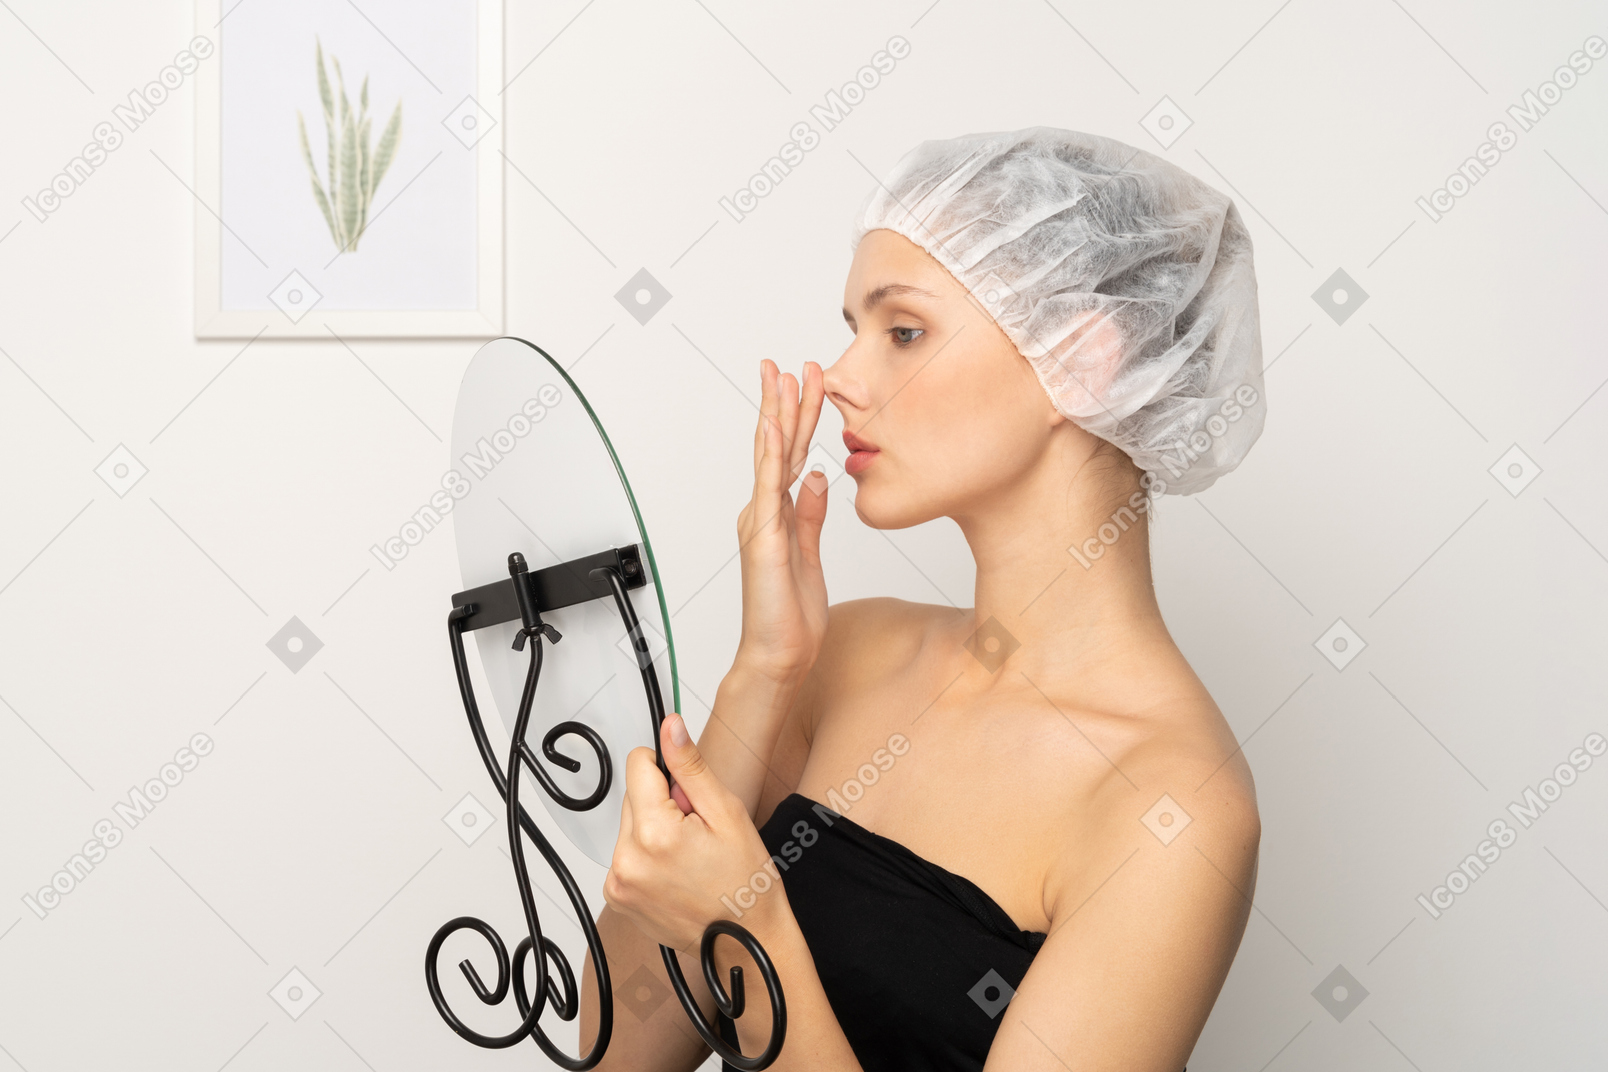 Young woman in surgical cap lifting her nose while looking in the mirror